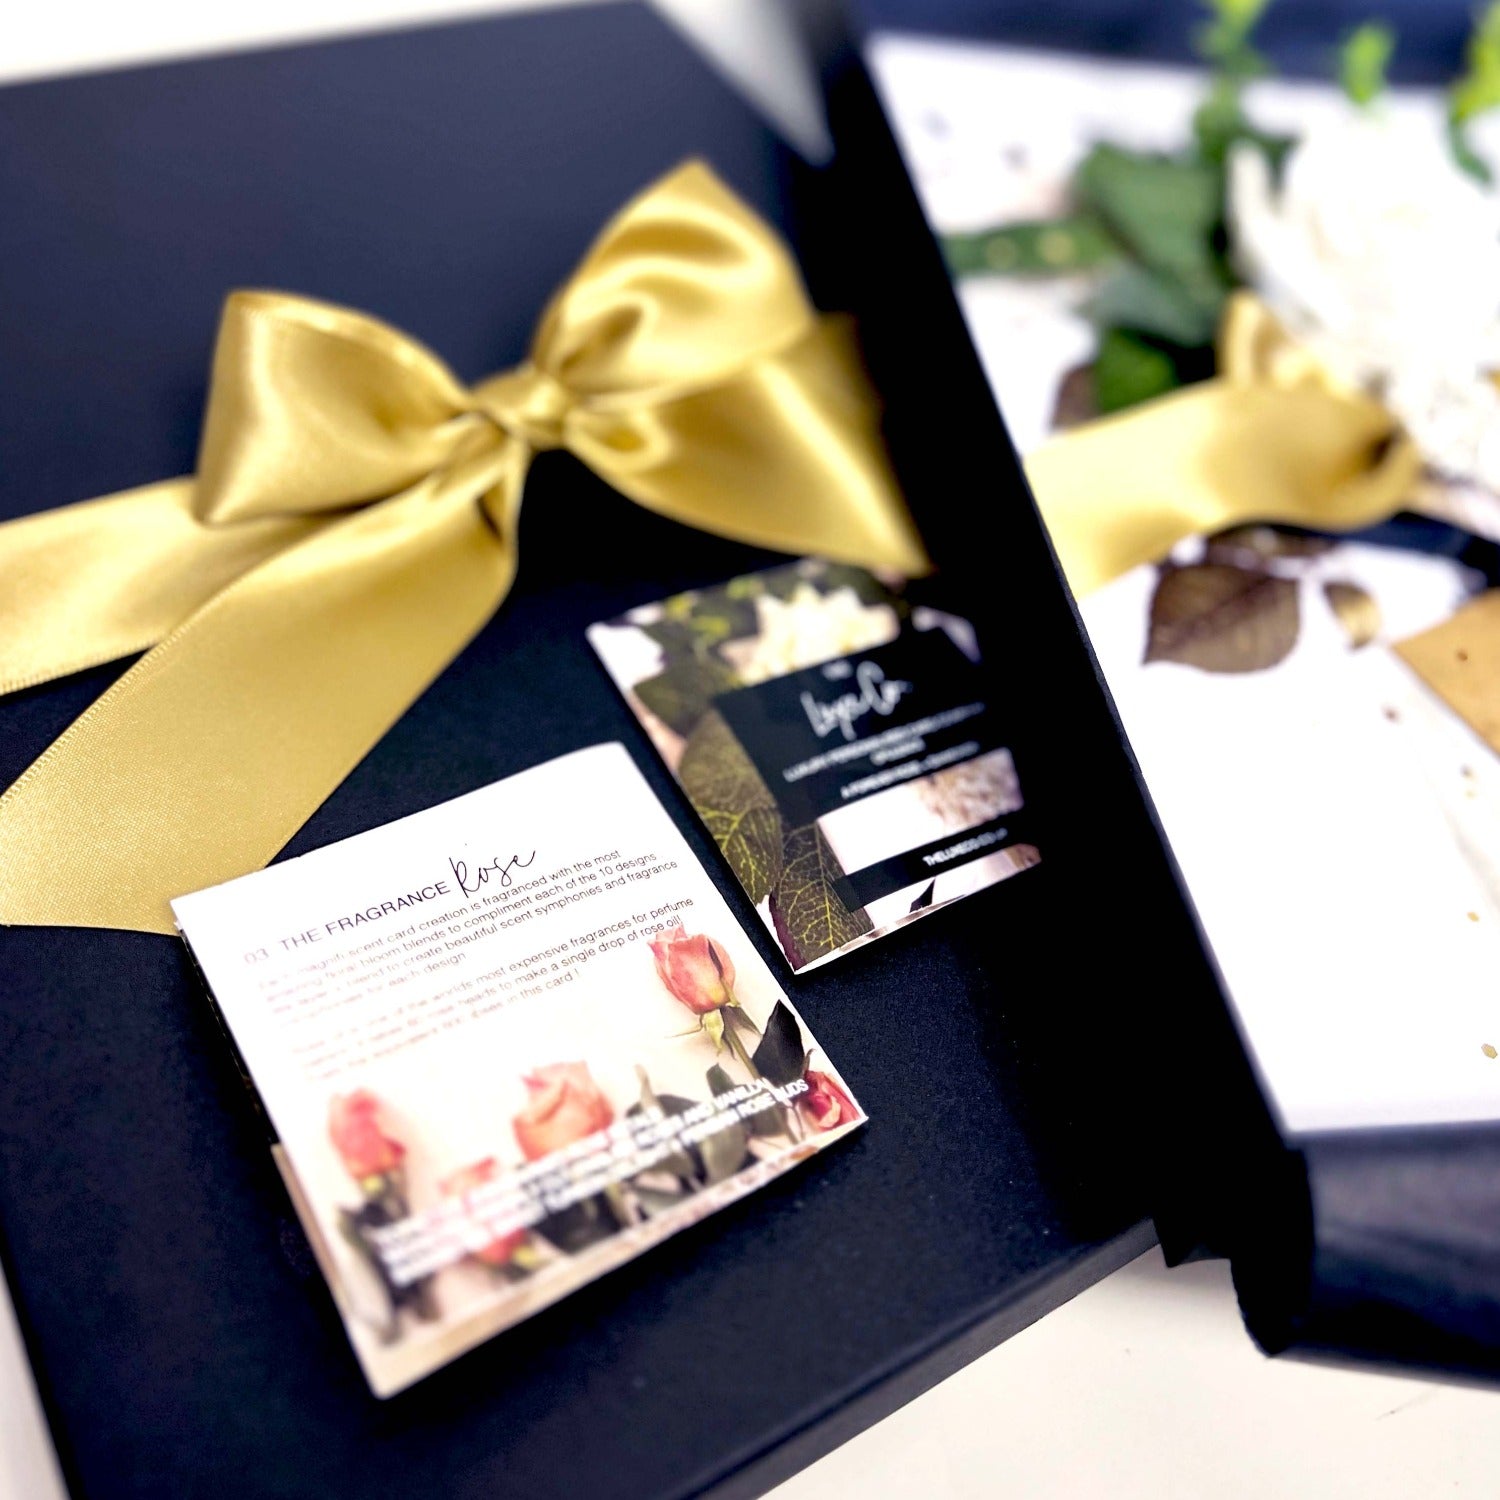 Bloom Opulence Luxury Golden anniversary cards in beautiful black gift box tied with gold sash